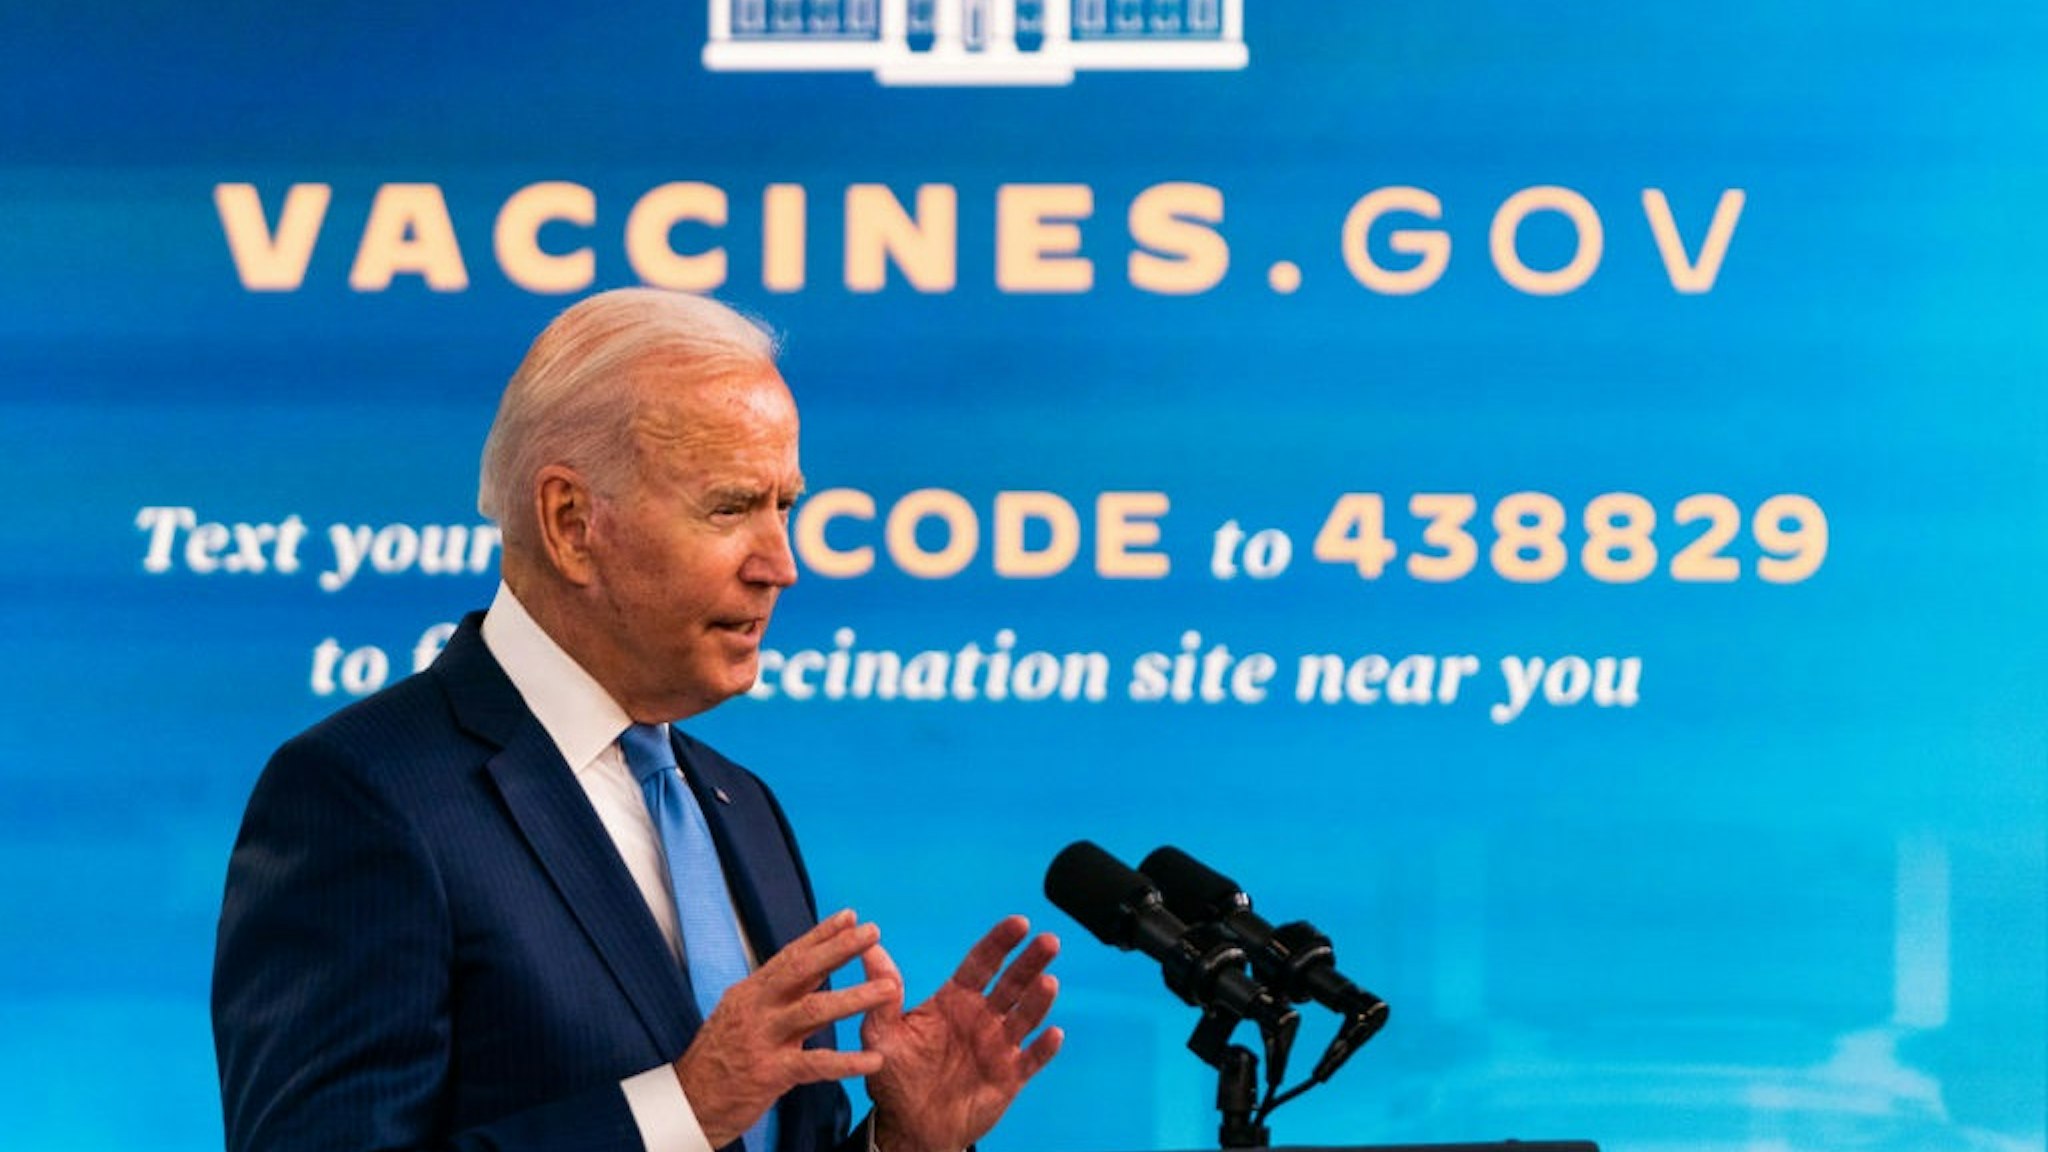 WASHINGTON, DC August 23, 2021: US President Joe Biden delivers remarks on the COVID vaccine in the South Court Auditorium at the White House on August 23, 2021.